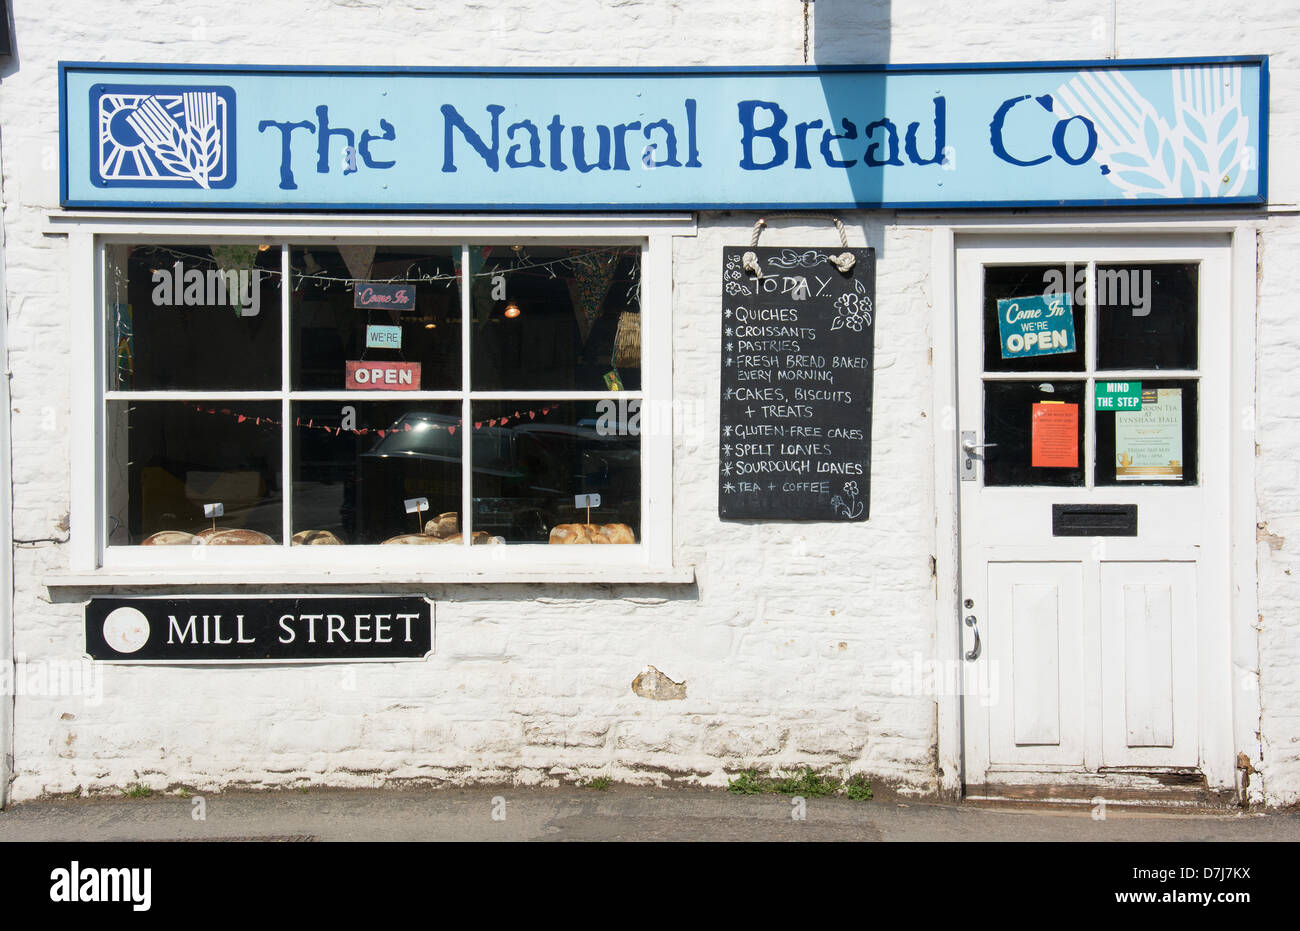 OXFORDSHIRE, UK. The Natural Bread Co, an artisan bakery in the village of Eynsham near Witney. 2013. Stock Photo